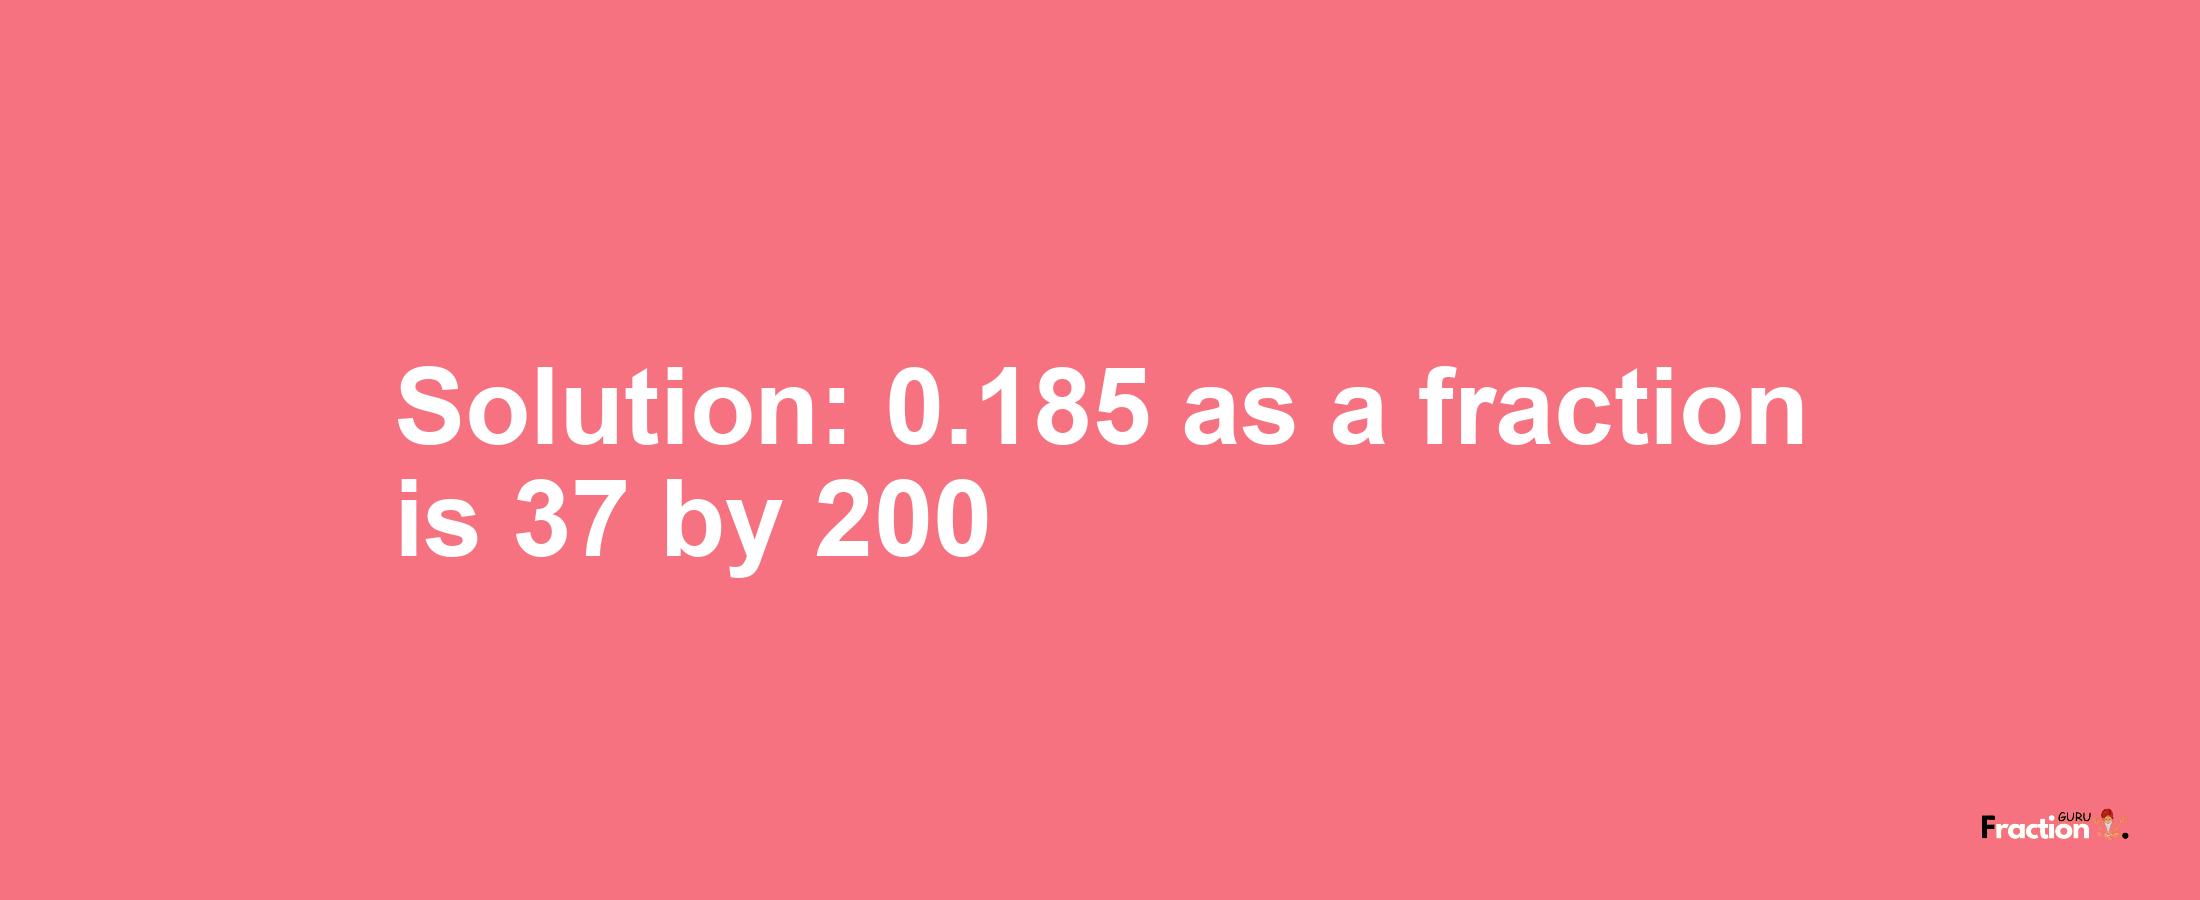 Solution:0.185 as a fraction is 37/200